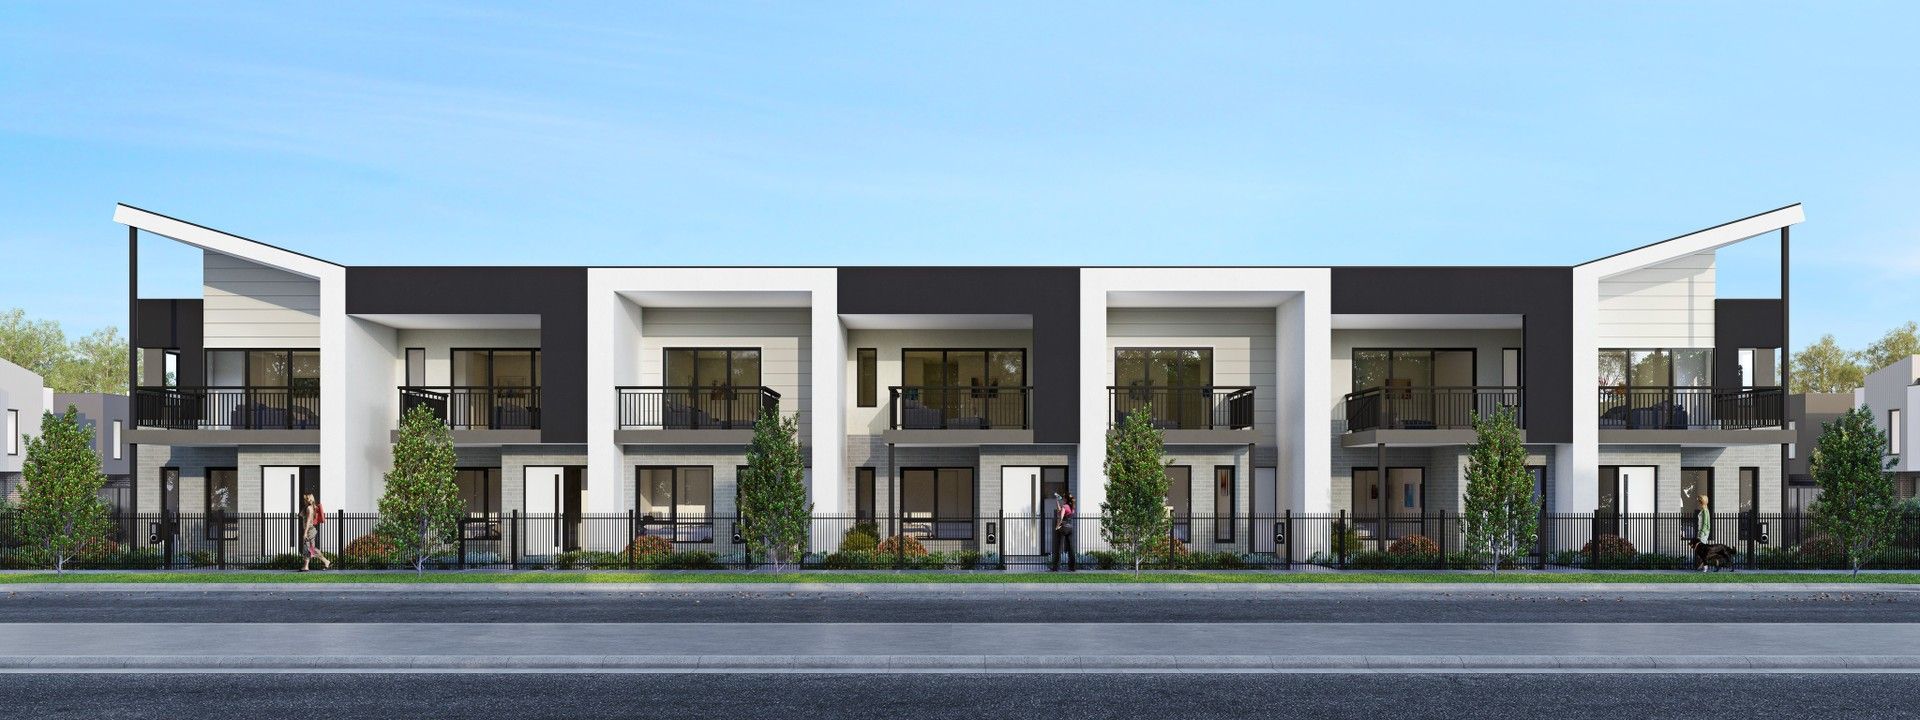 Orbost Mid Townhome by Metricon Homes, Kalkallo VIC 3064, Image 1